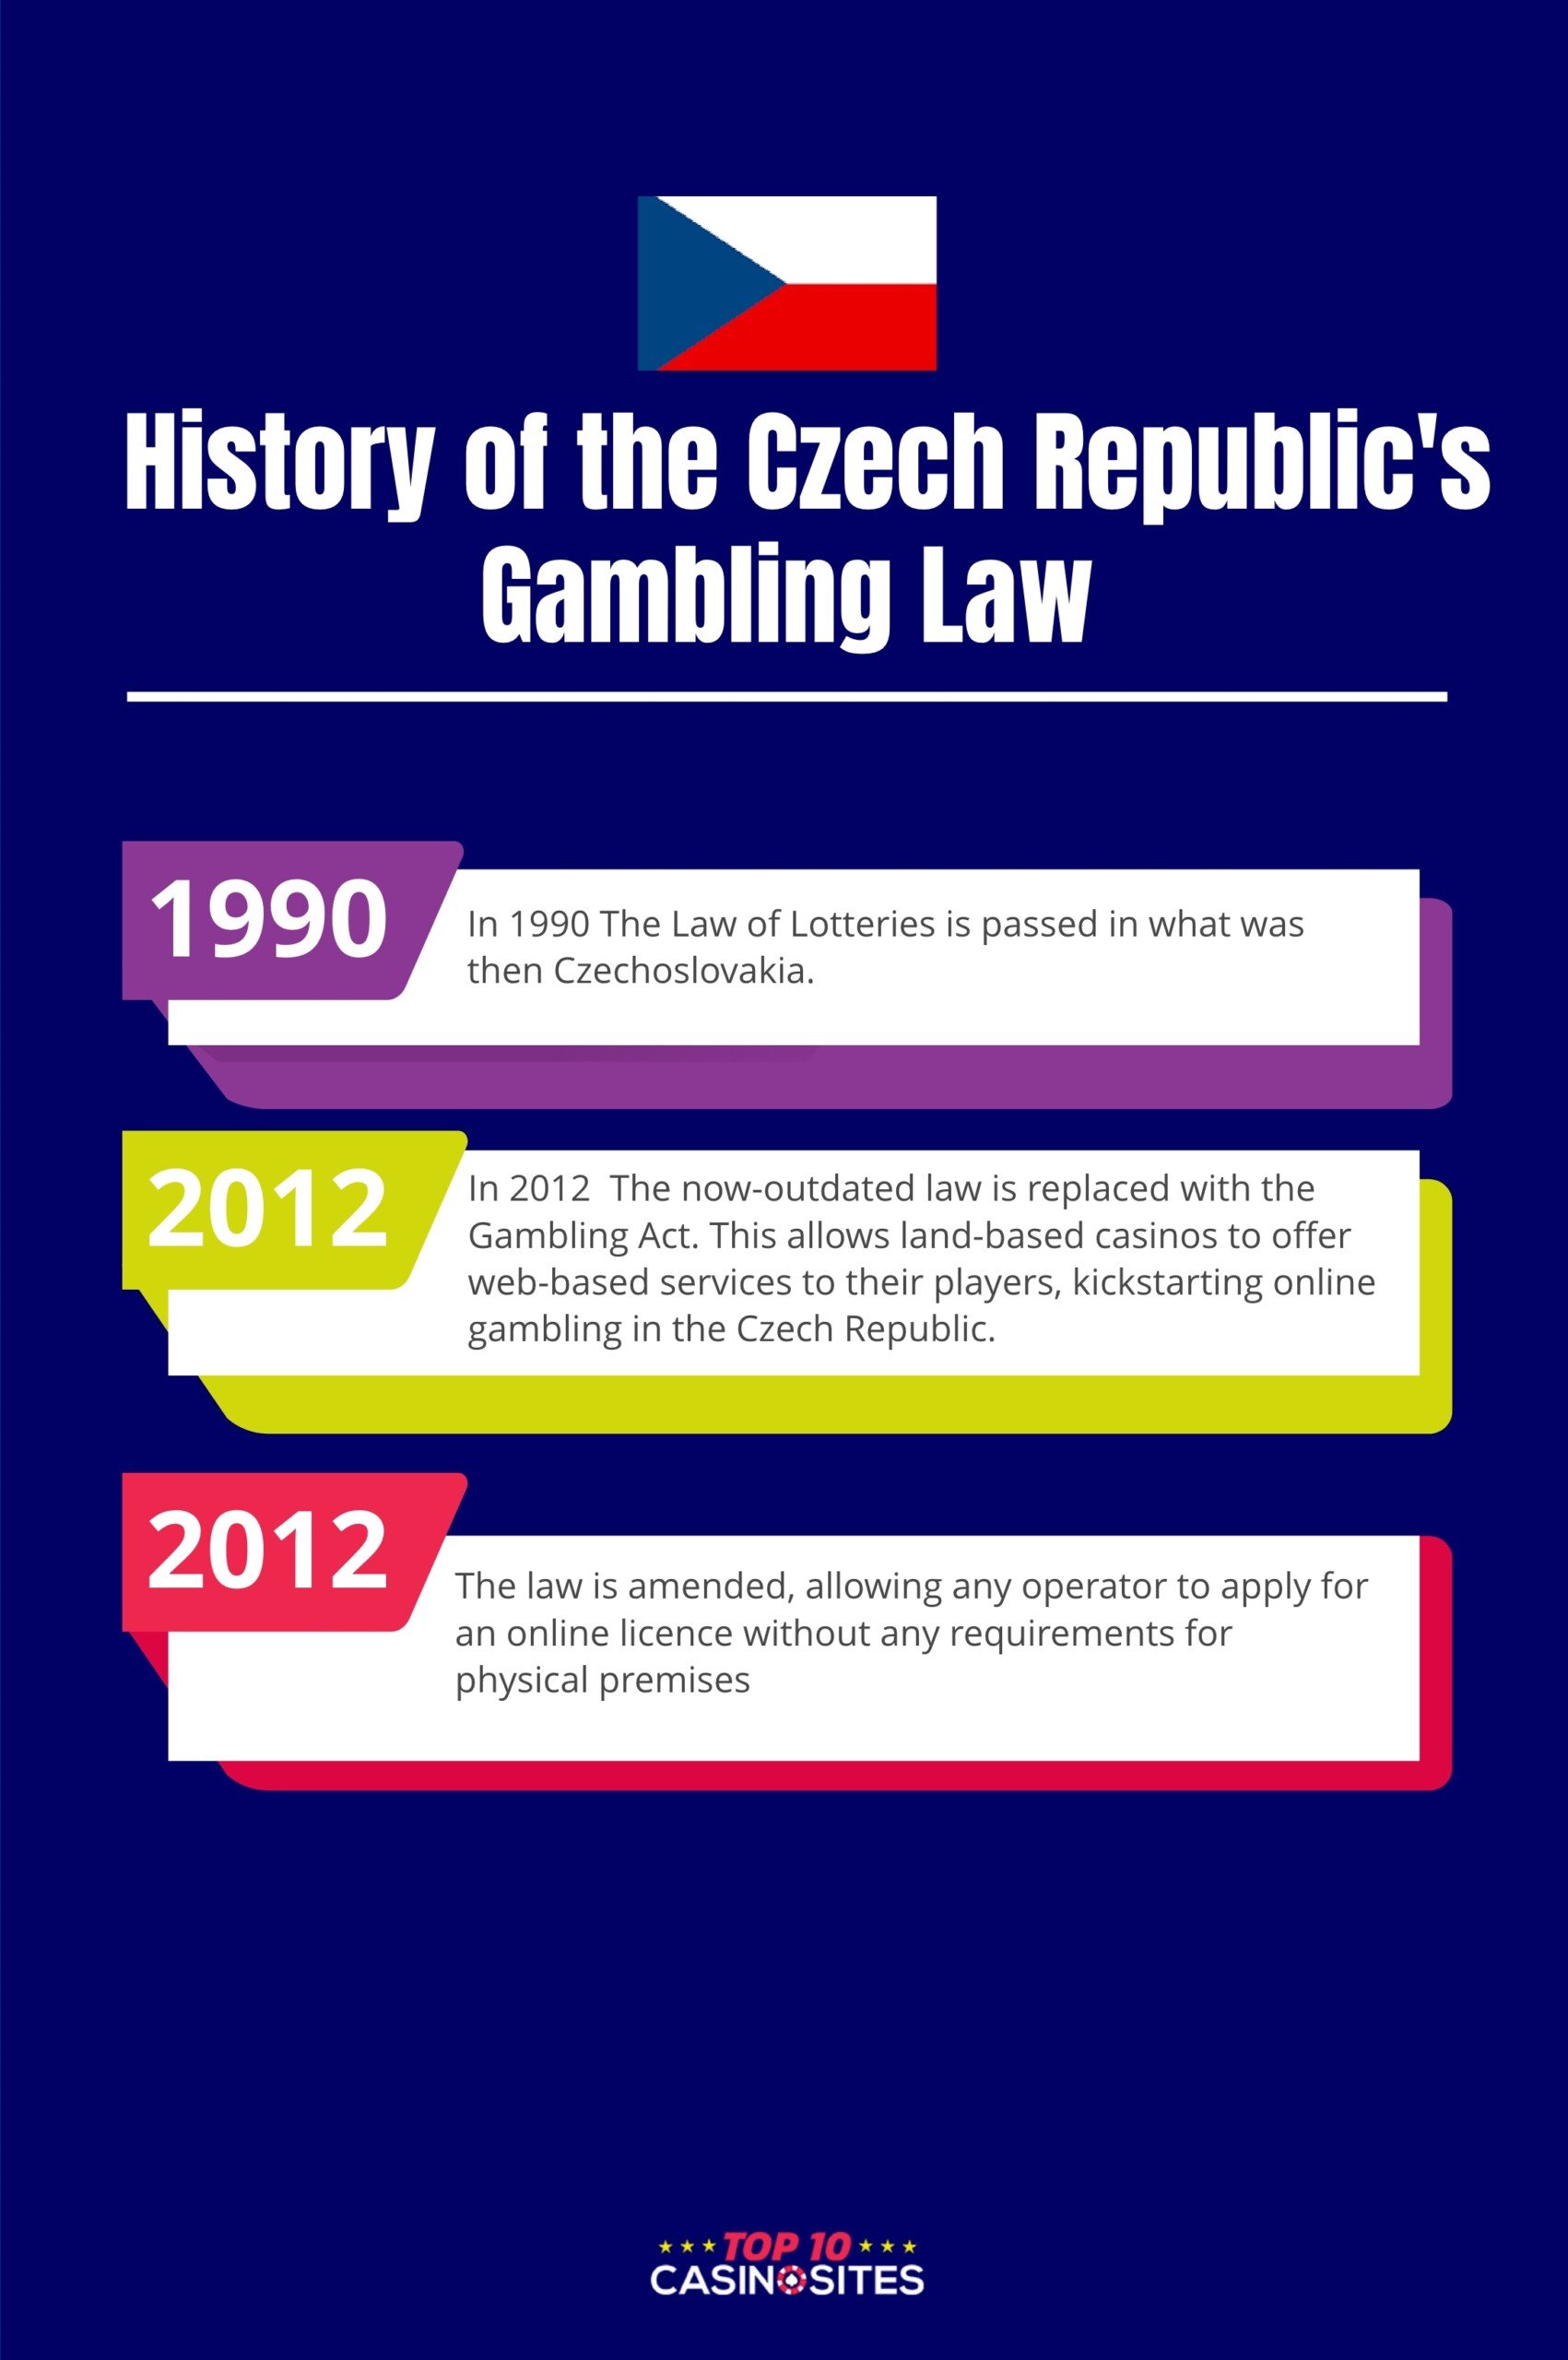 An infographic of the history of Czech Republic's Gambling Law